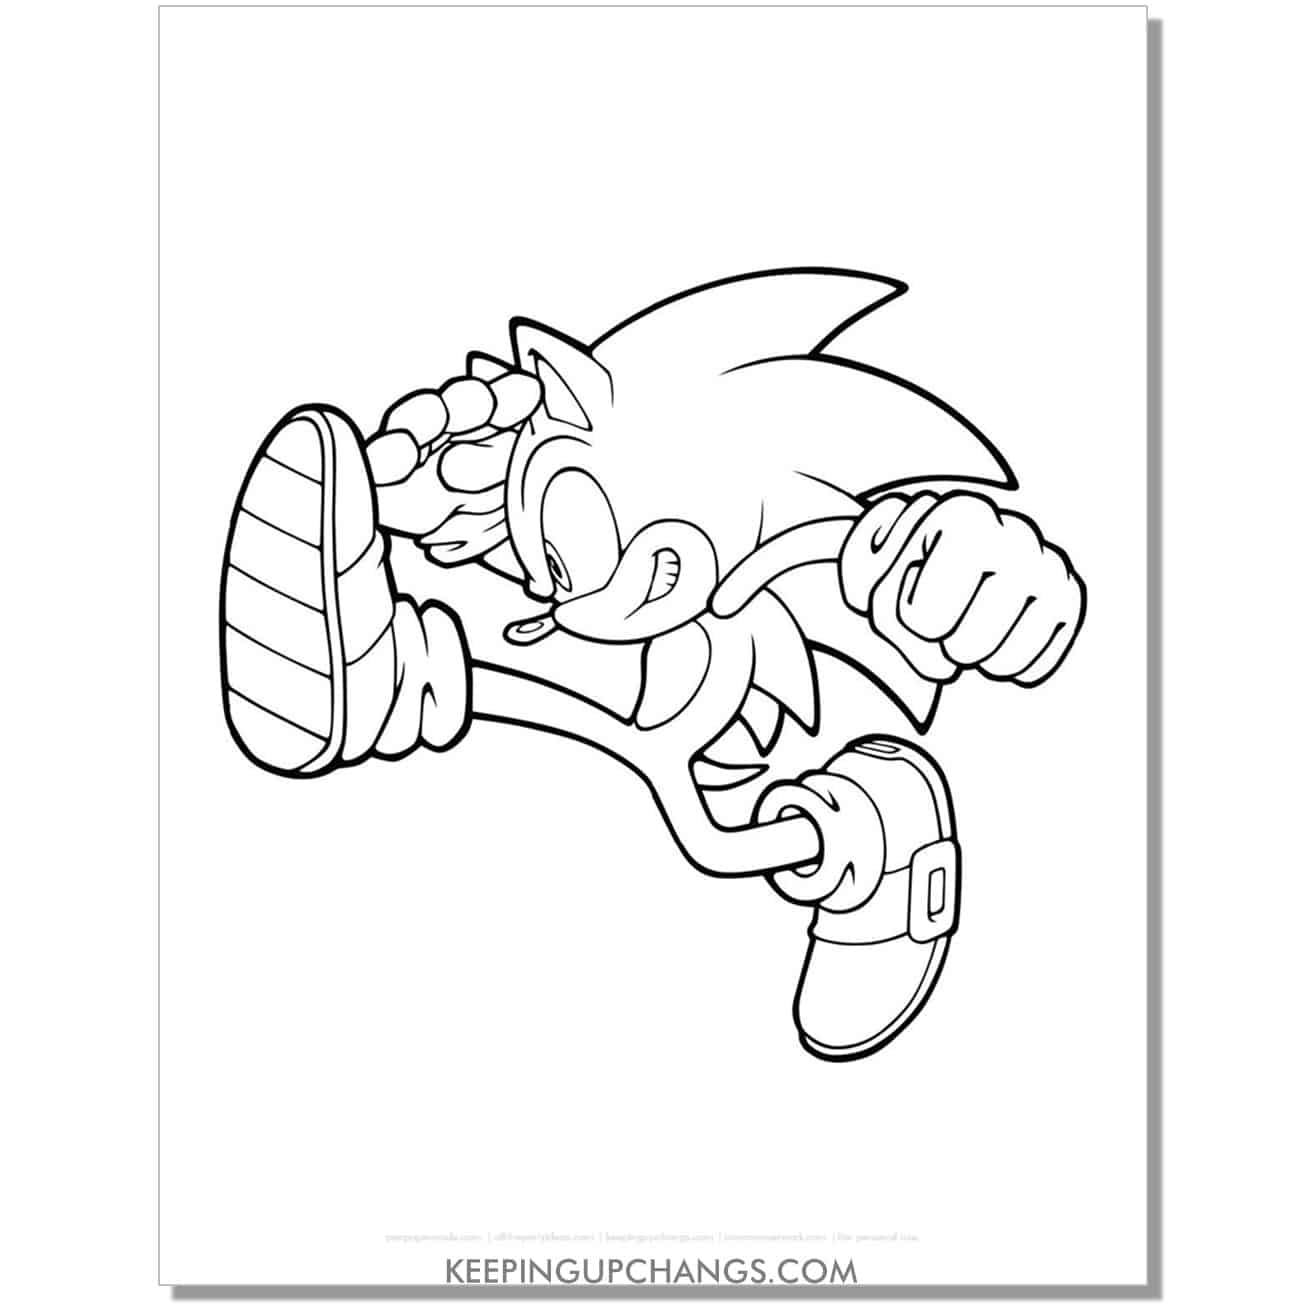 Free sonic the hedgehog coloring pages popular printables